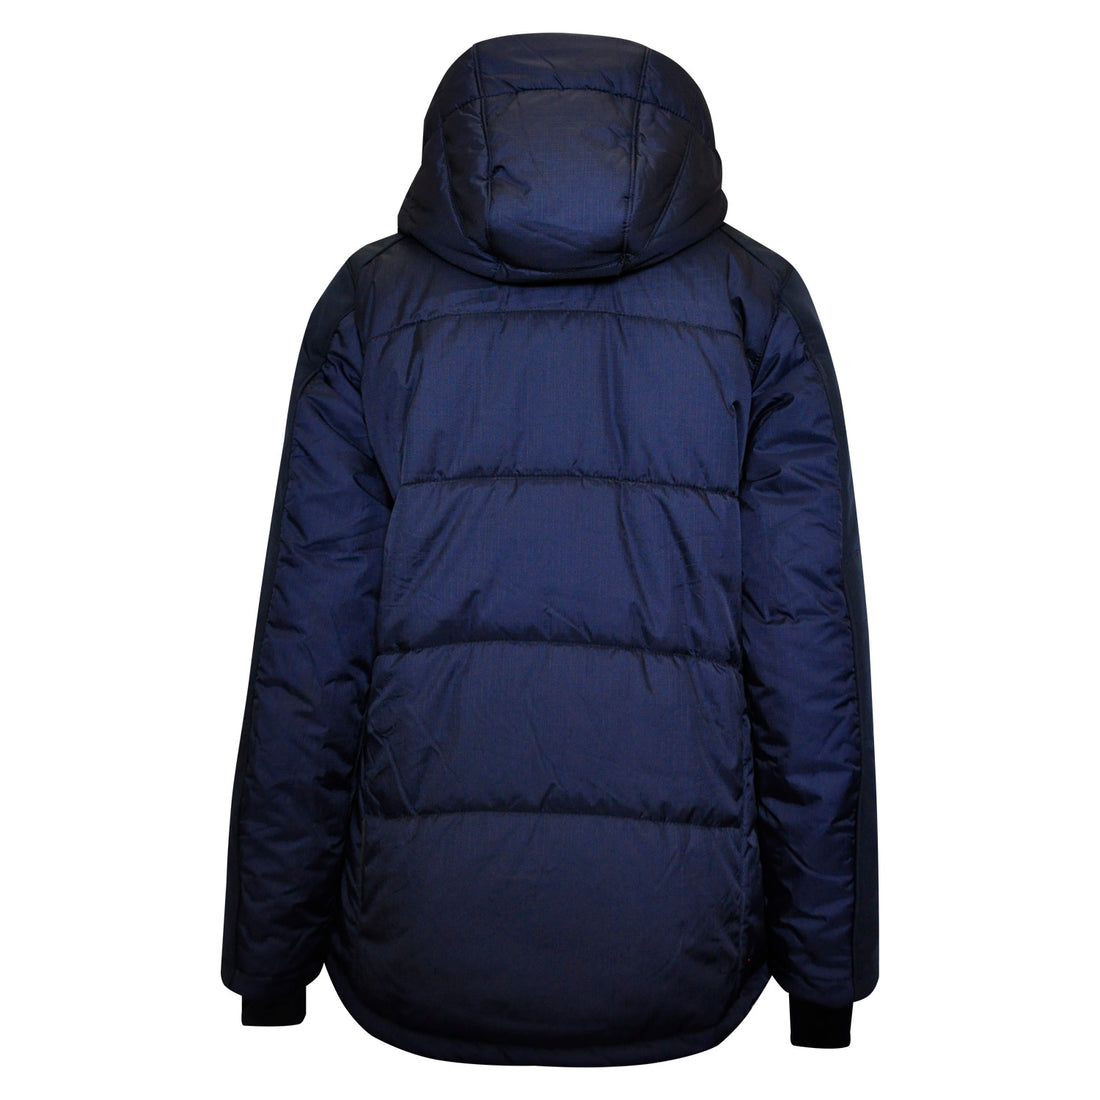 Laguso Navy Puffer Jacket with detachable hood. Ergonomically shaped sleeves with drawcord in waistband and velcro at the sleeve end. Front pocket and breast pocket with zipper, two inside pockets with zipper and one mesh pocket. Laguso arrow and bow on the chest, Laguso patch on the left sleeve and Laguso embroidery on the back.